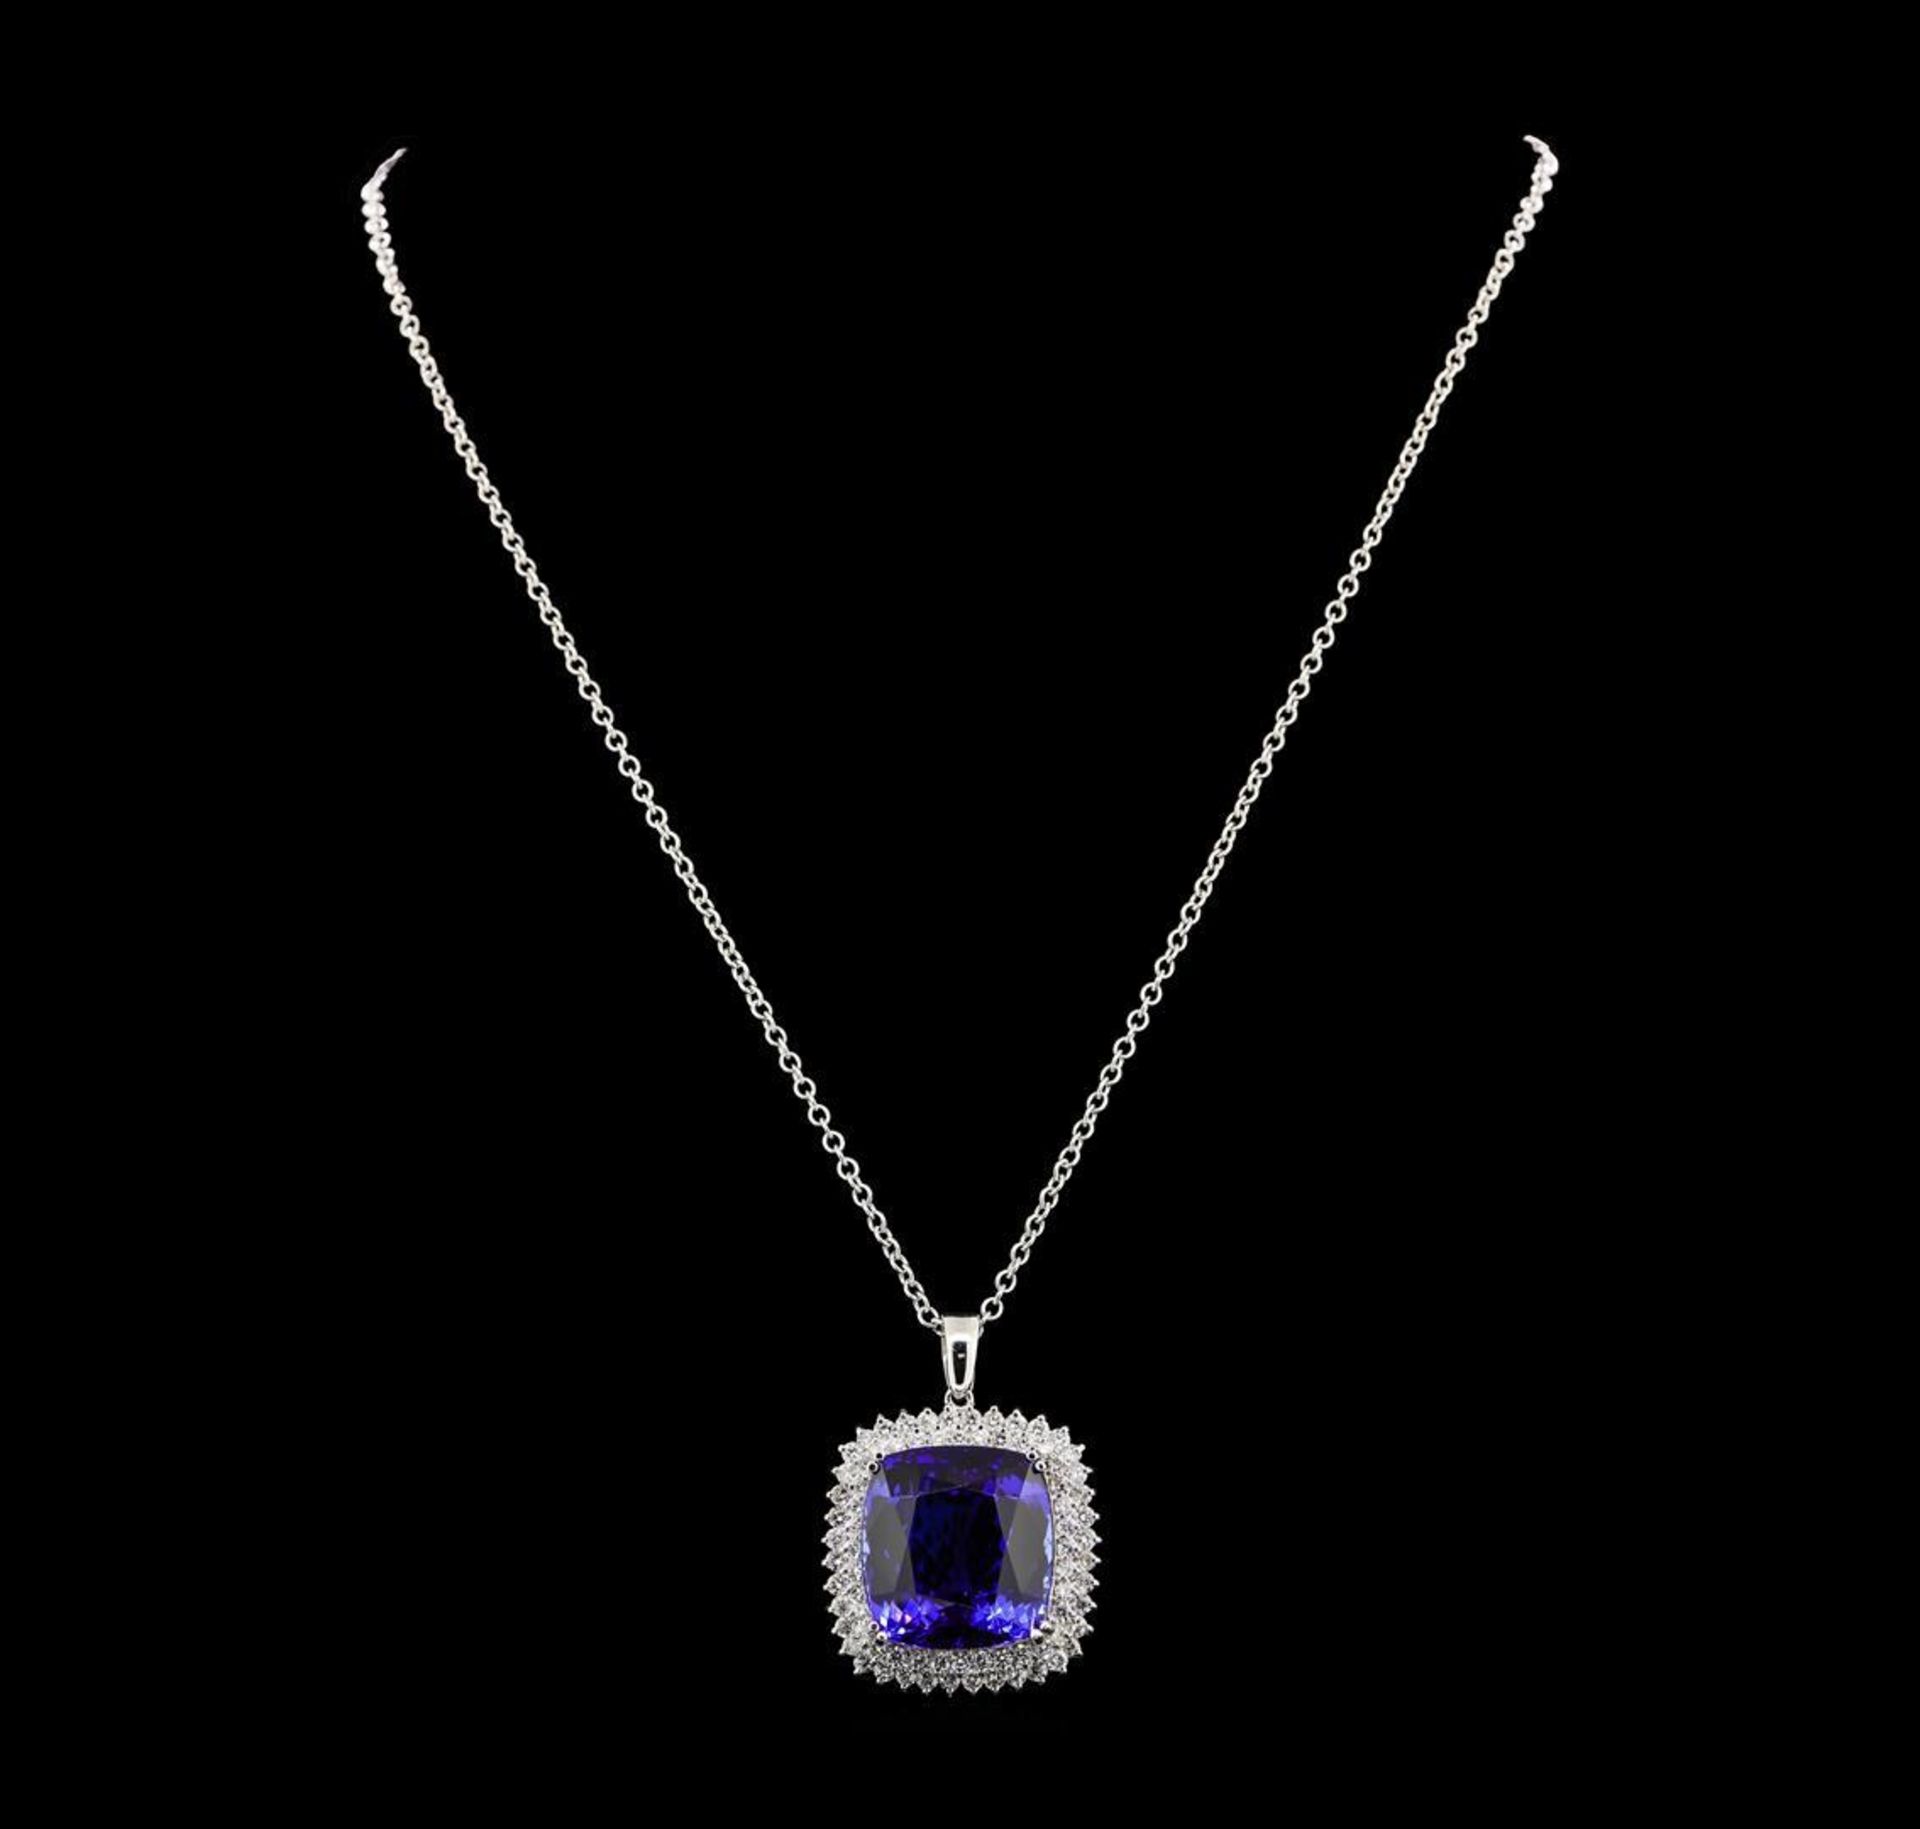 GIA Cert 40.78 ctw Tanzanite and Diamond Pendant With Chain - 14KT White Gold - Image 2 of 4